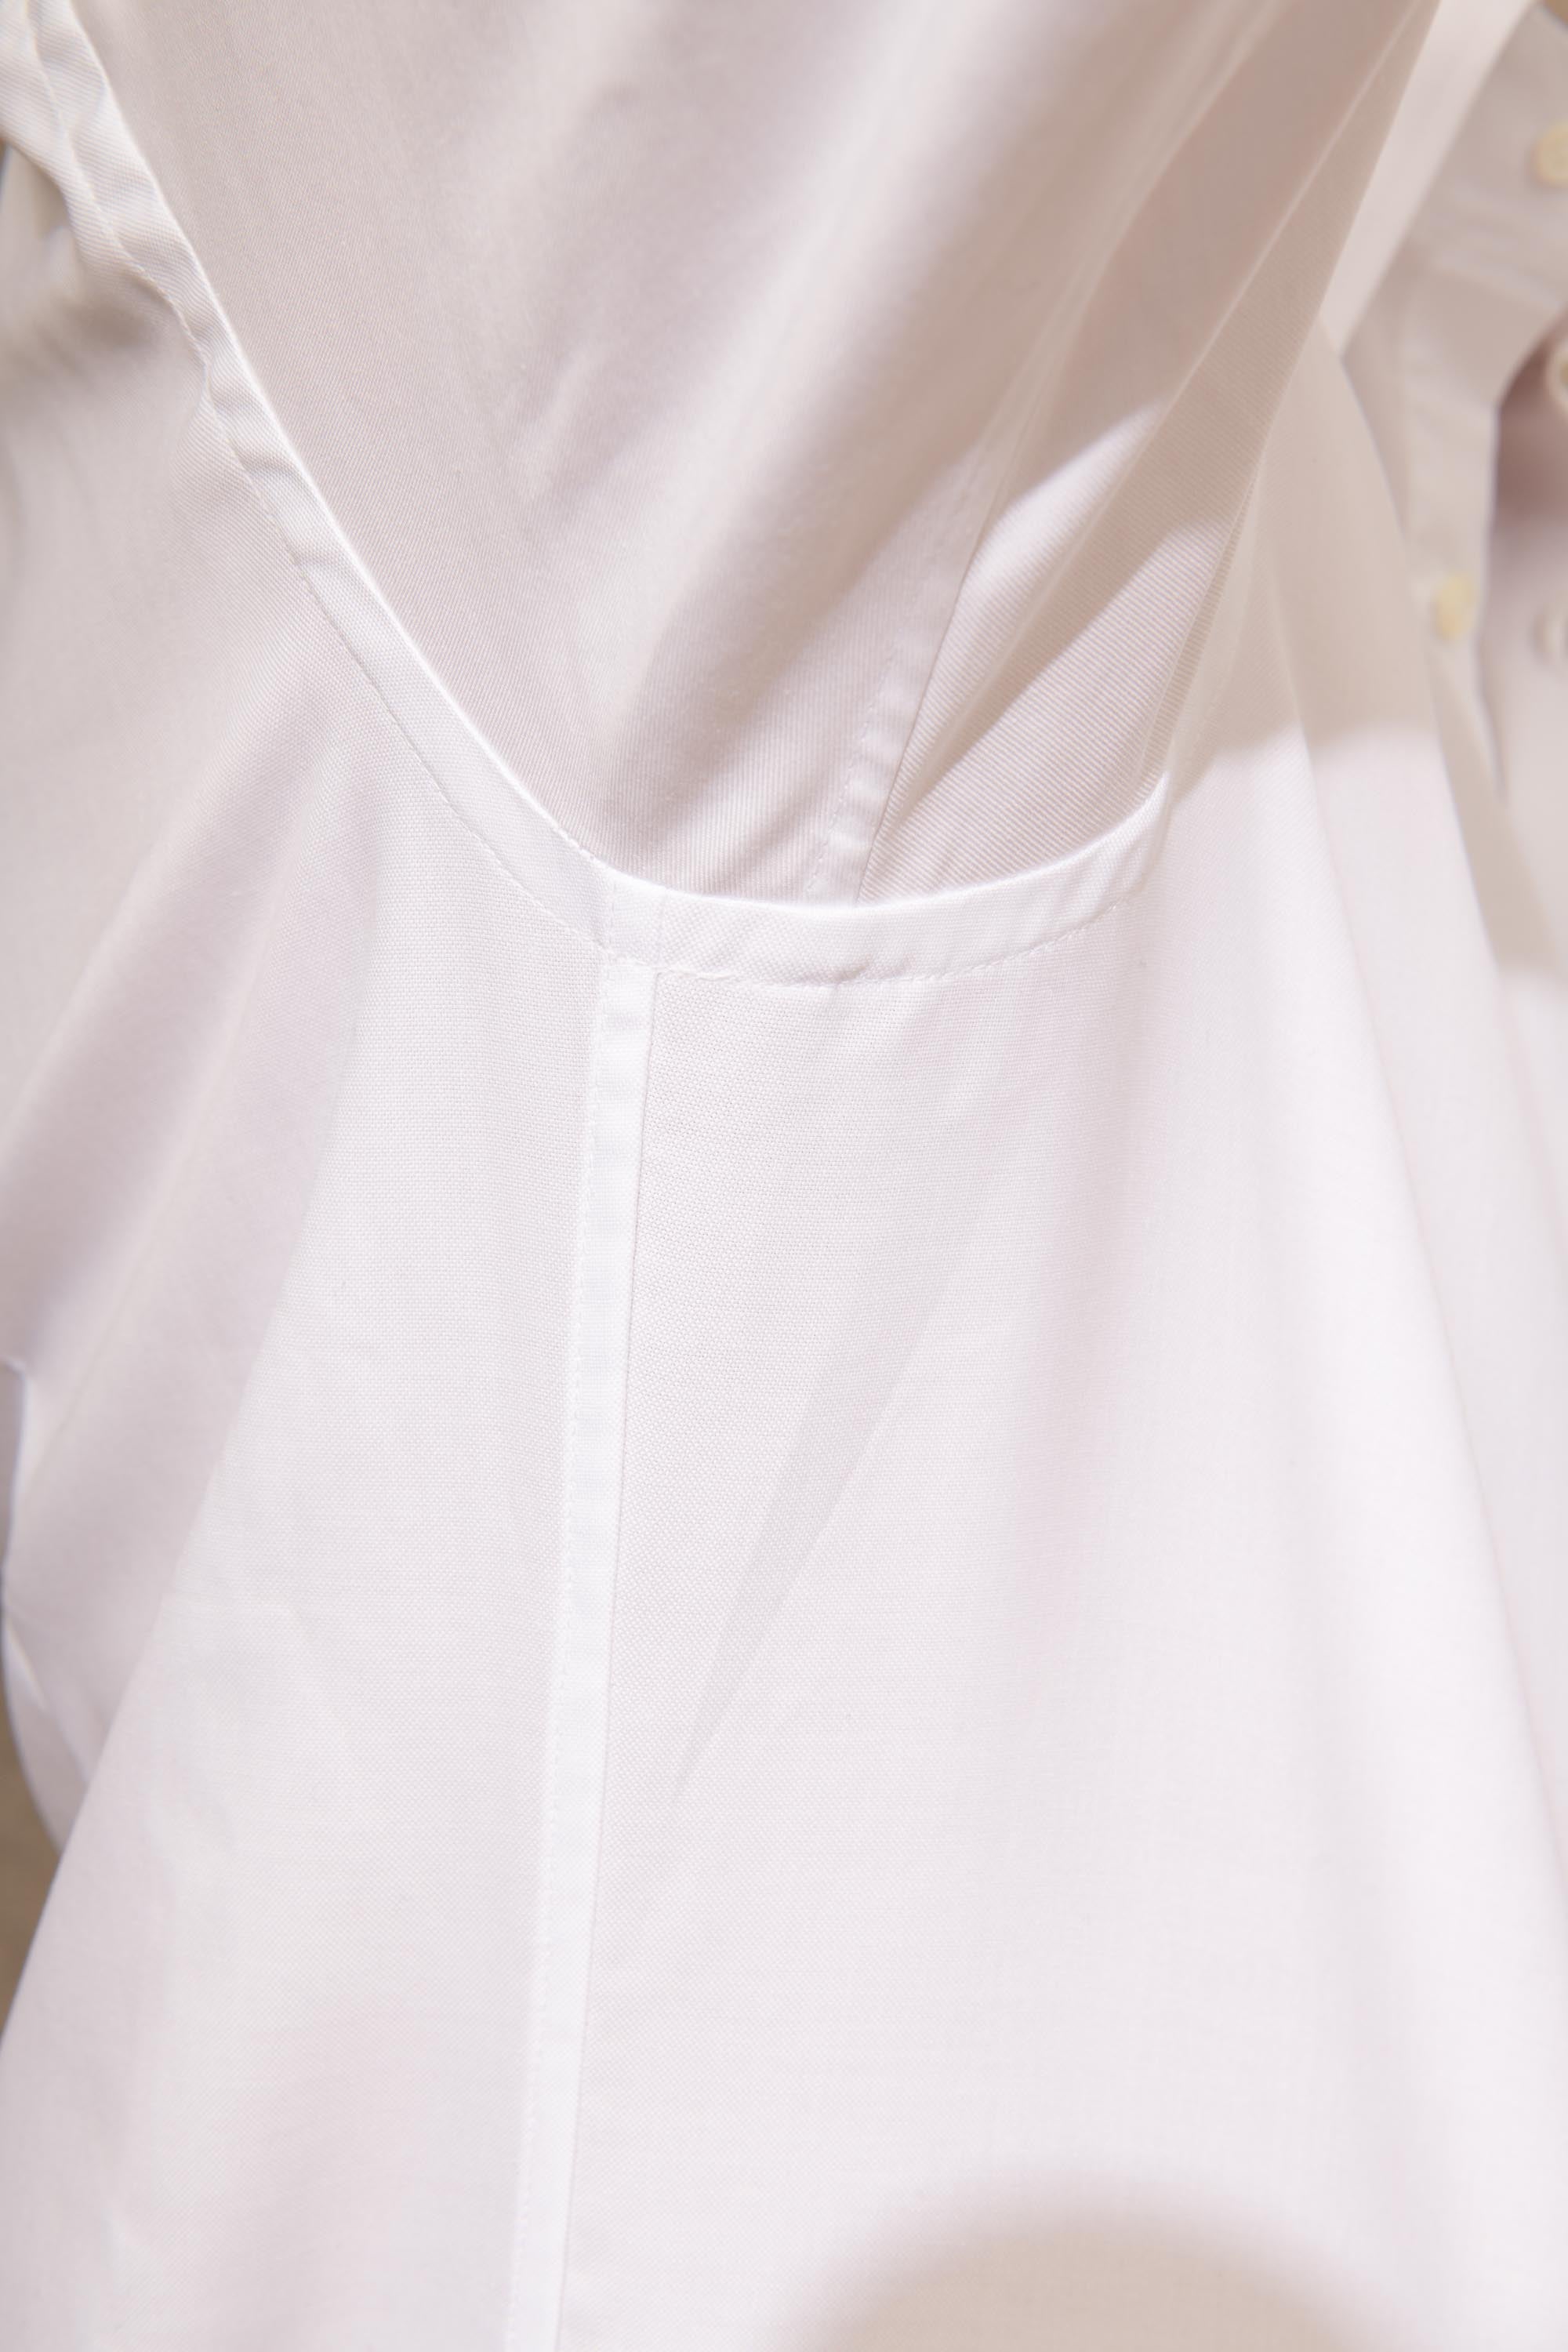 Button down white shirt ”Sartoriale collection”- Made In Italy - Pini Parma